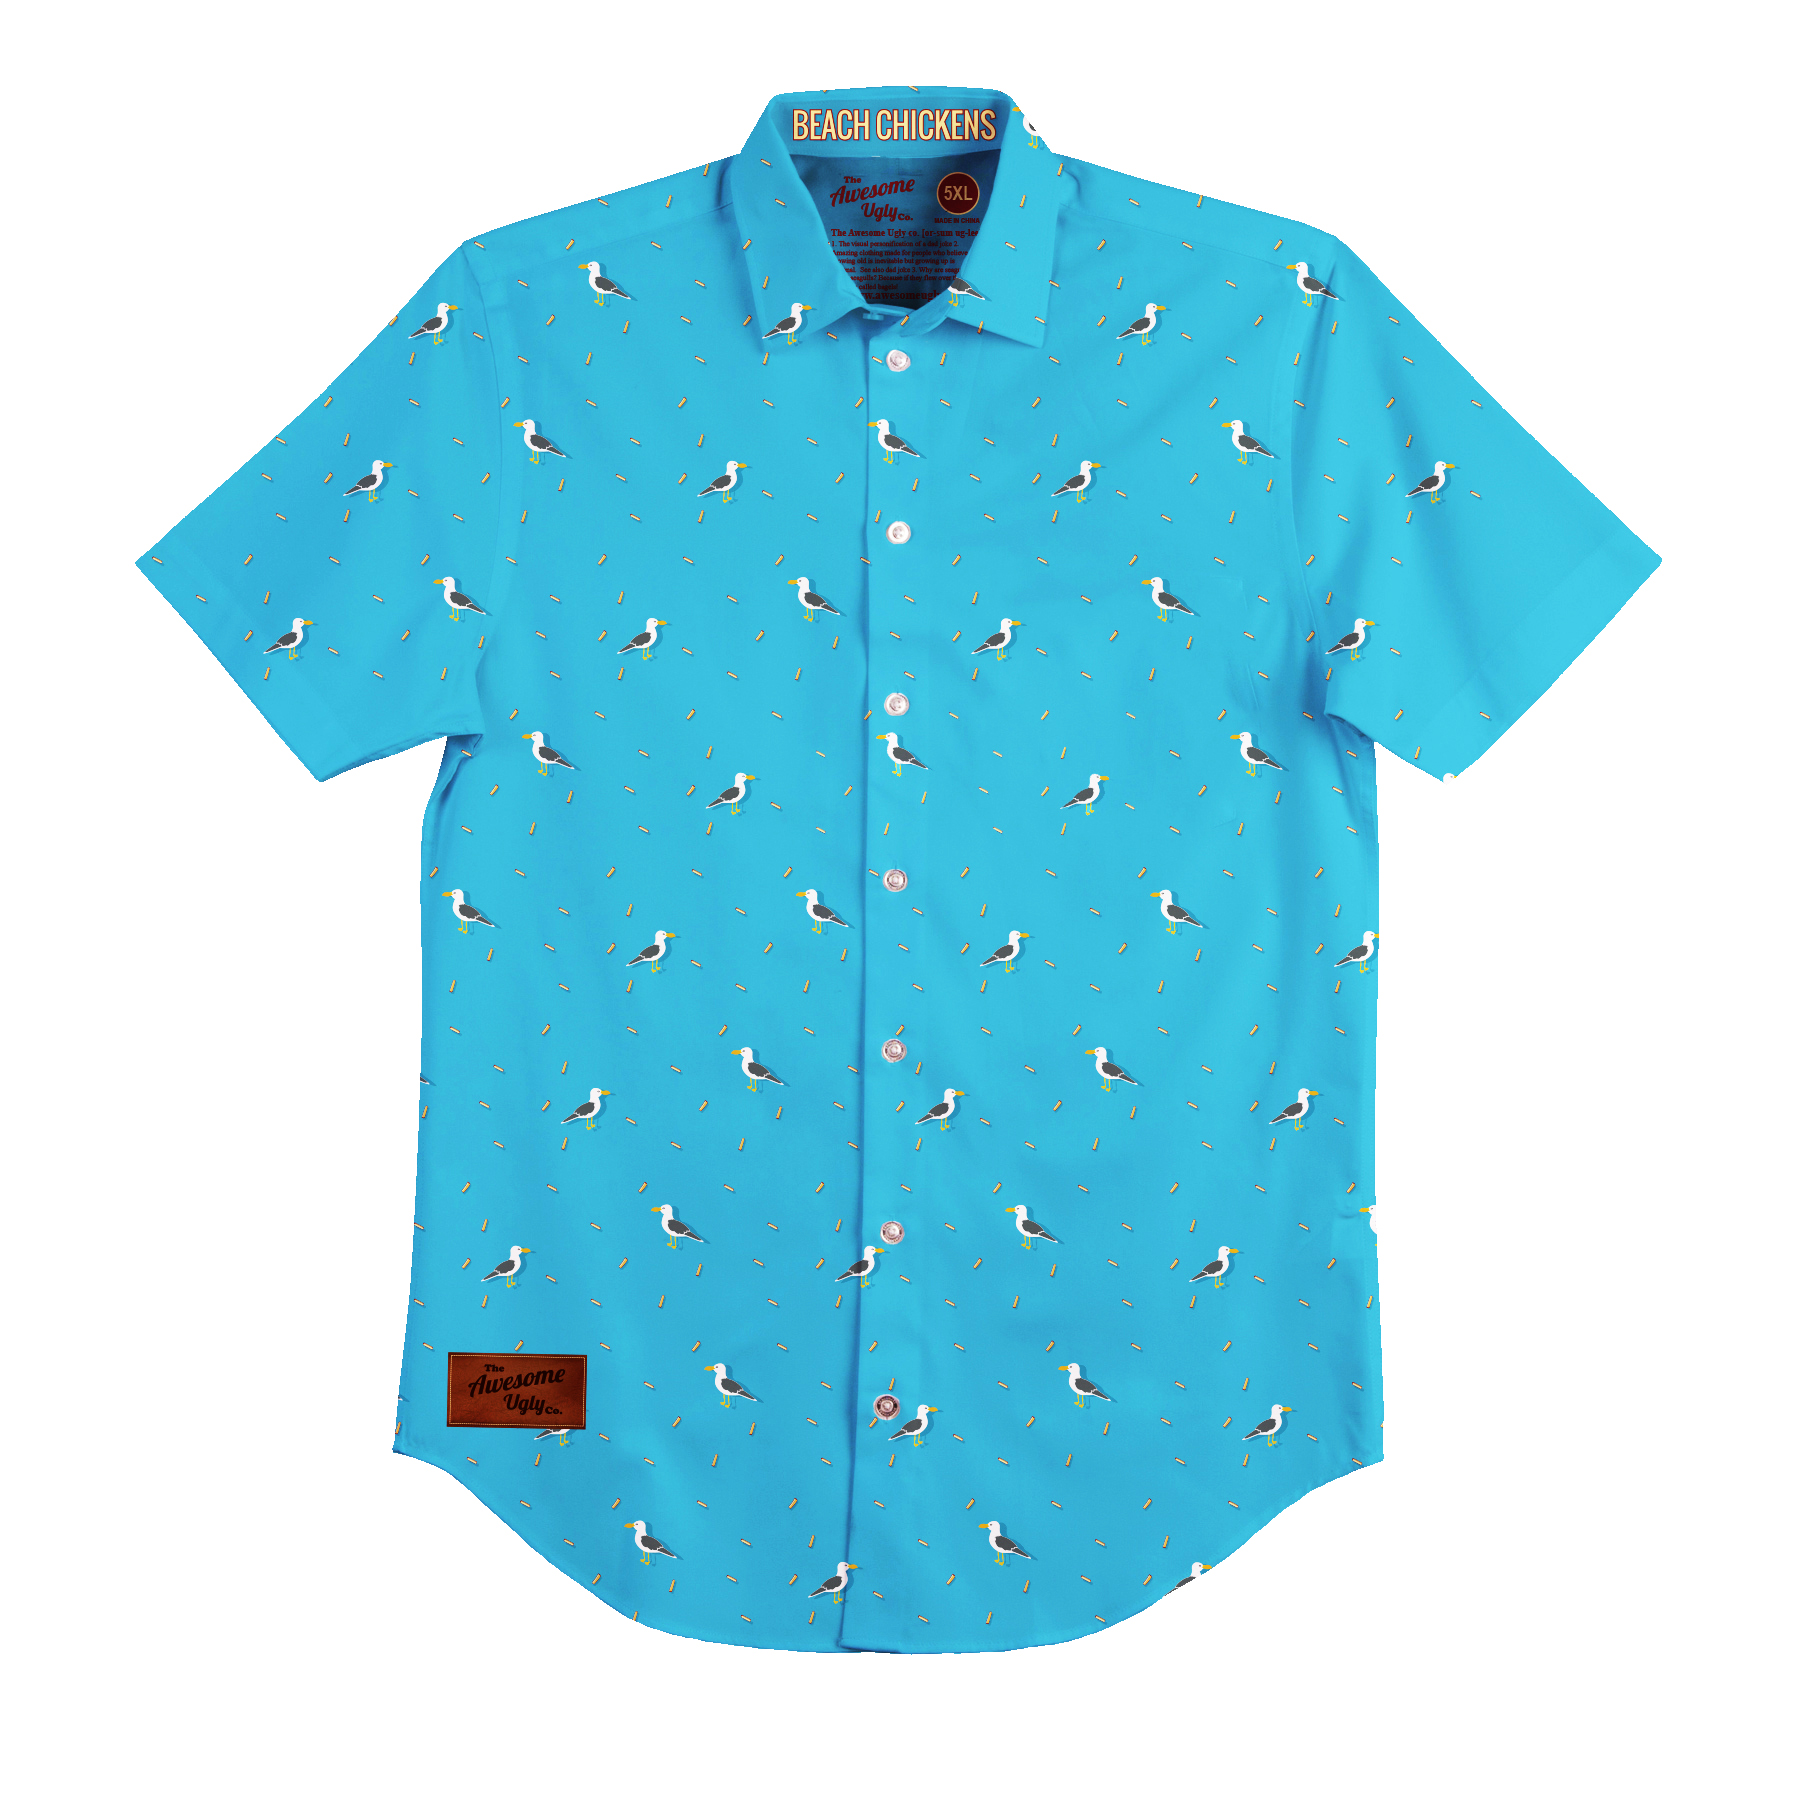 Beach Chicken BBQ Shirt - Mens - Awesome Ugly